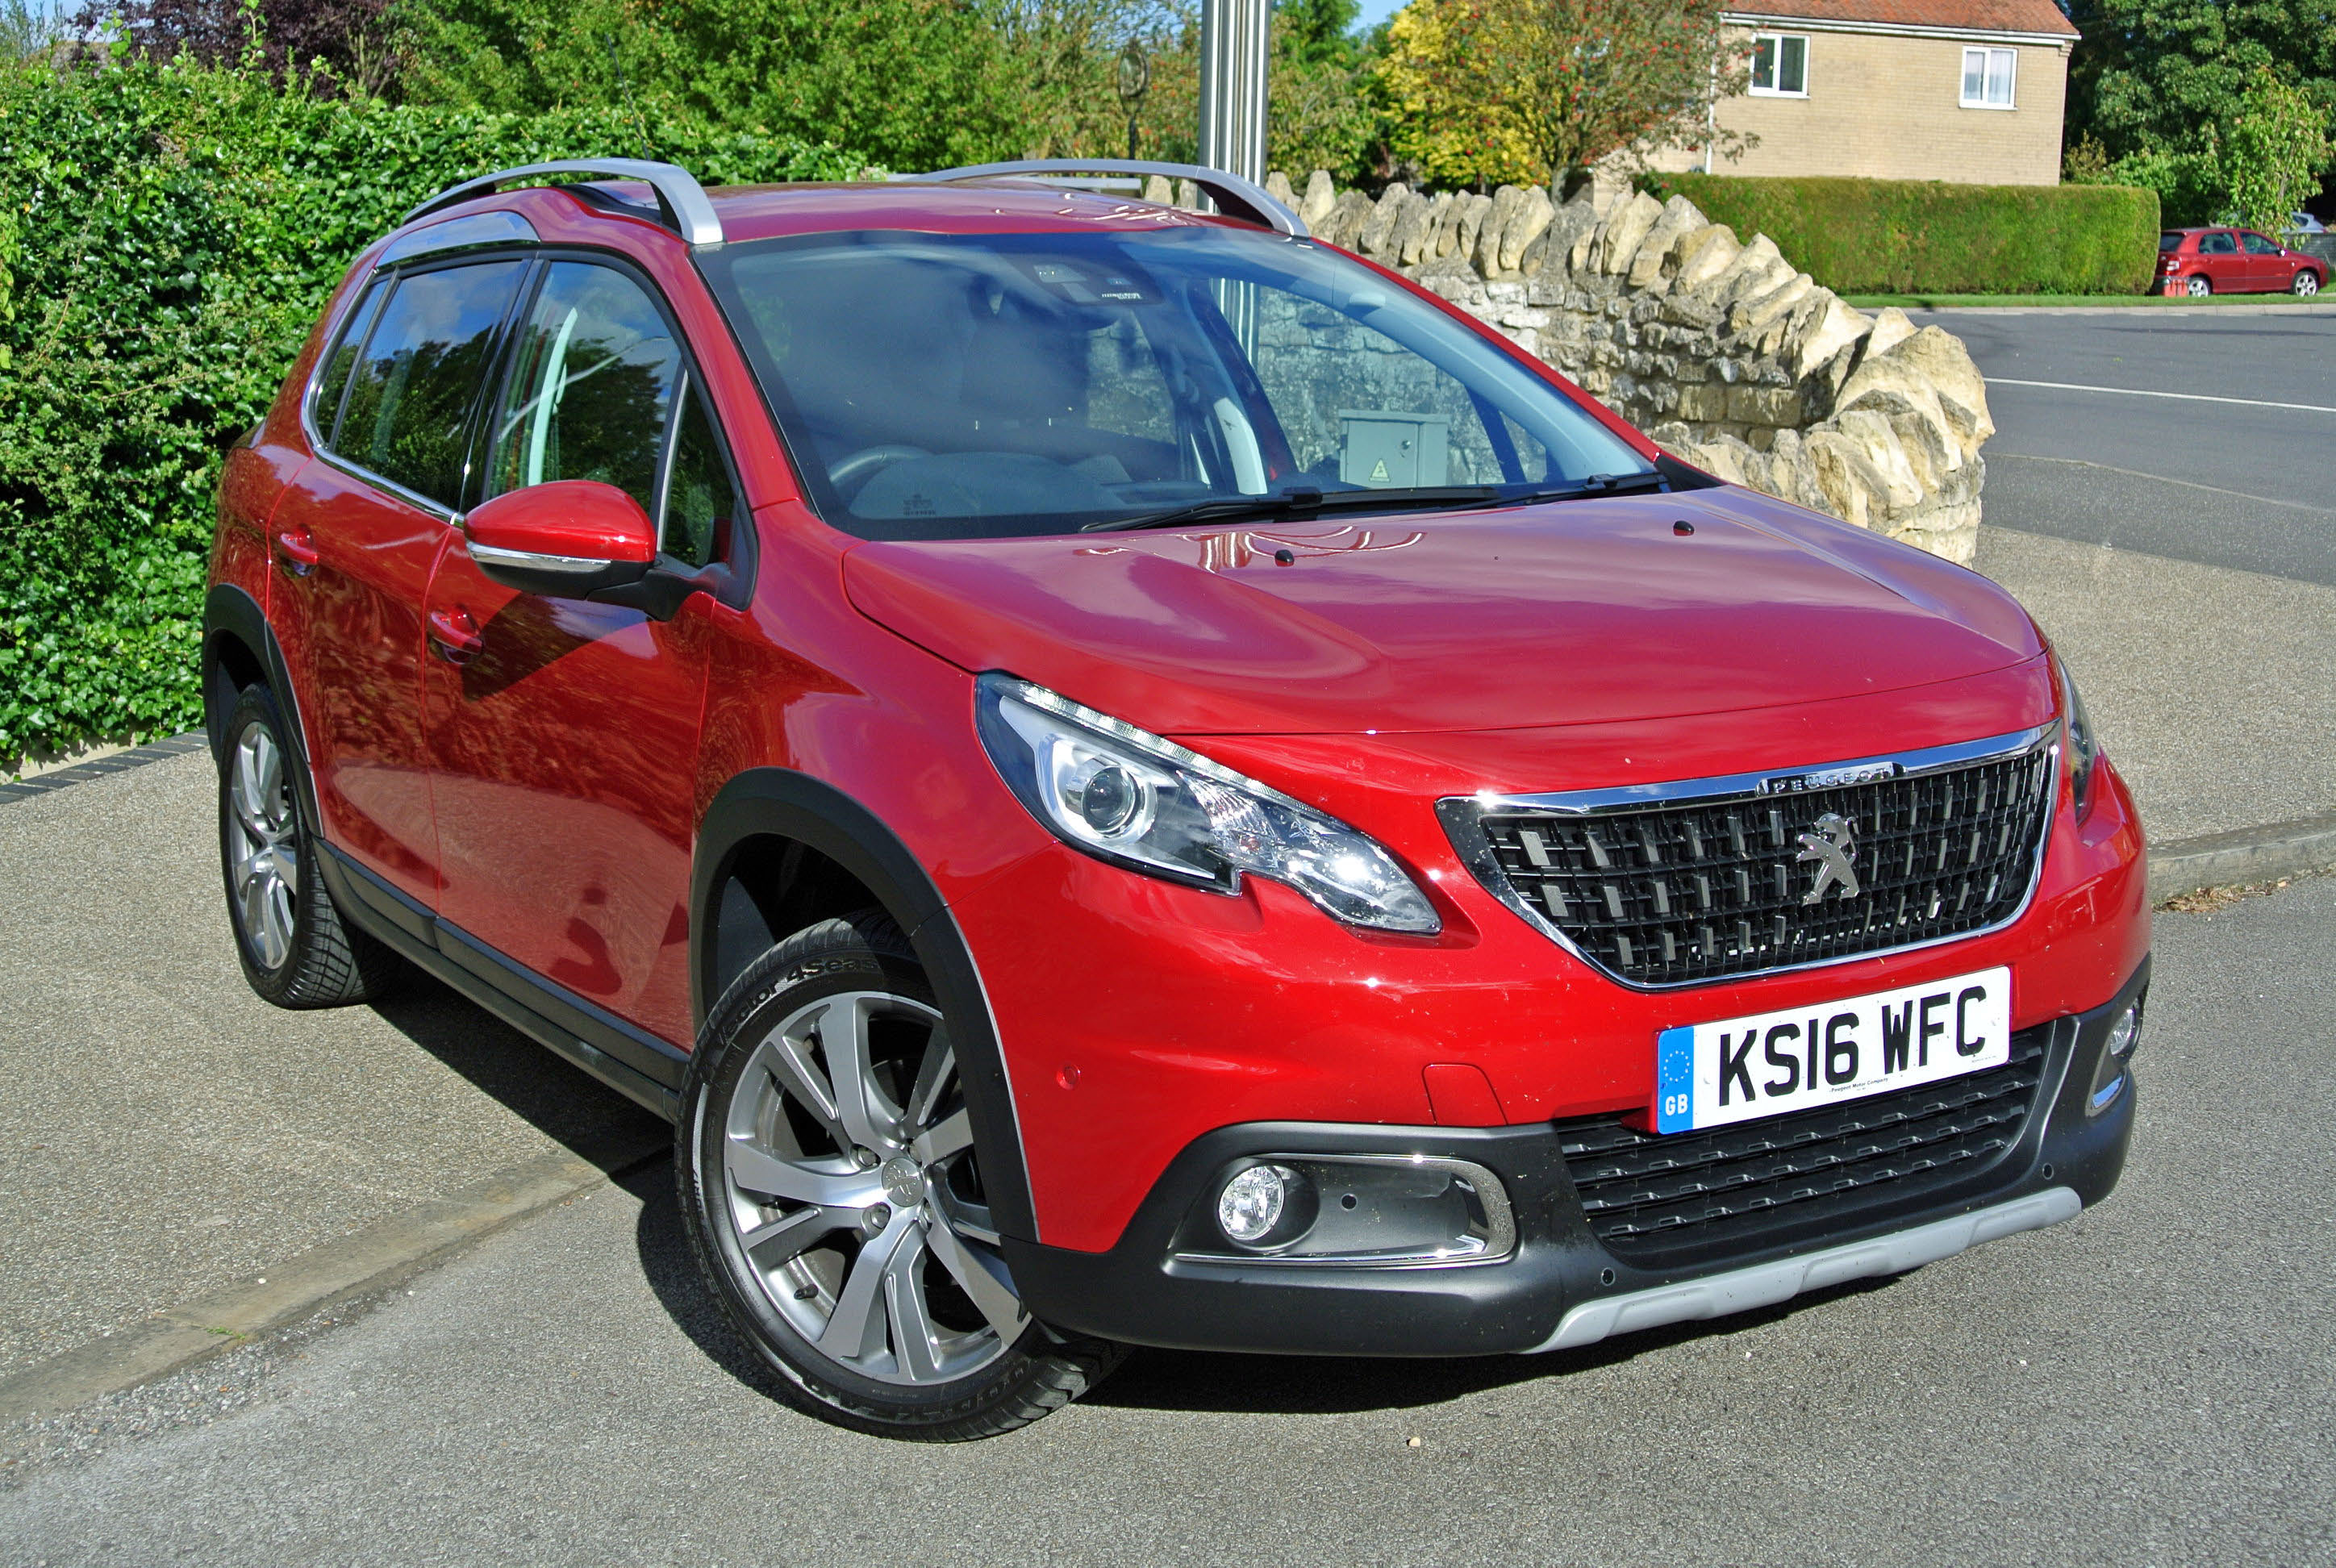 Peugeot’s redesigned 2008 crossover meets some, not all, parameters